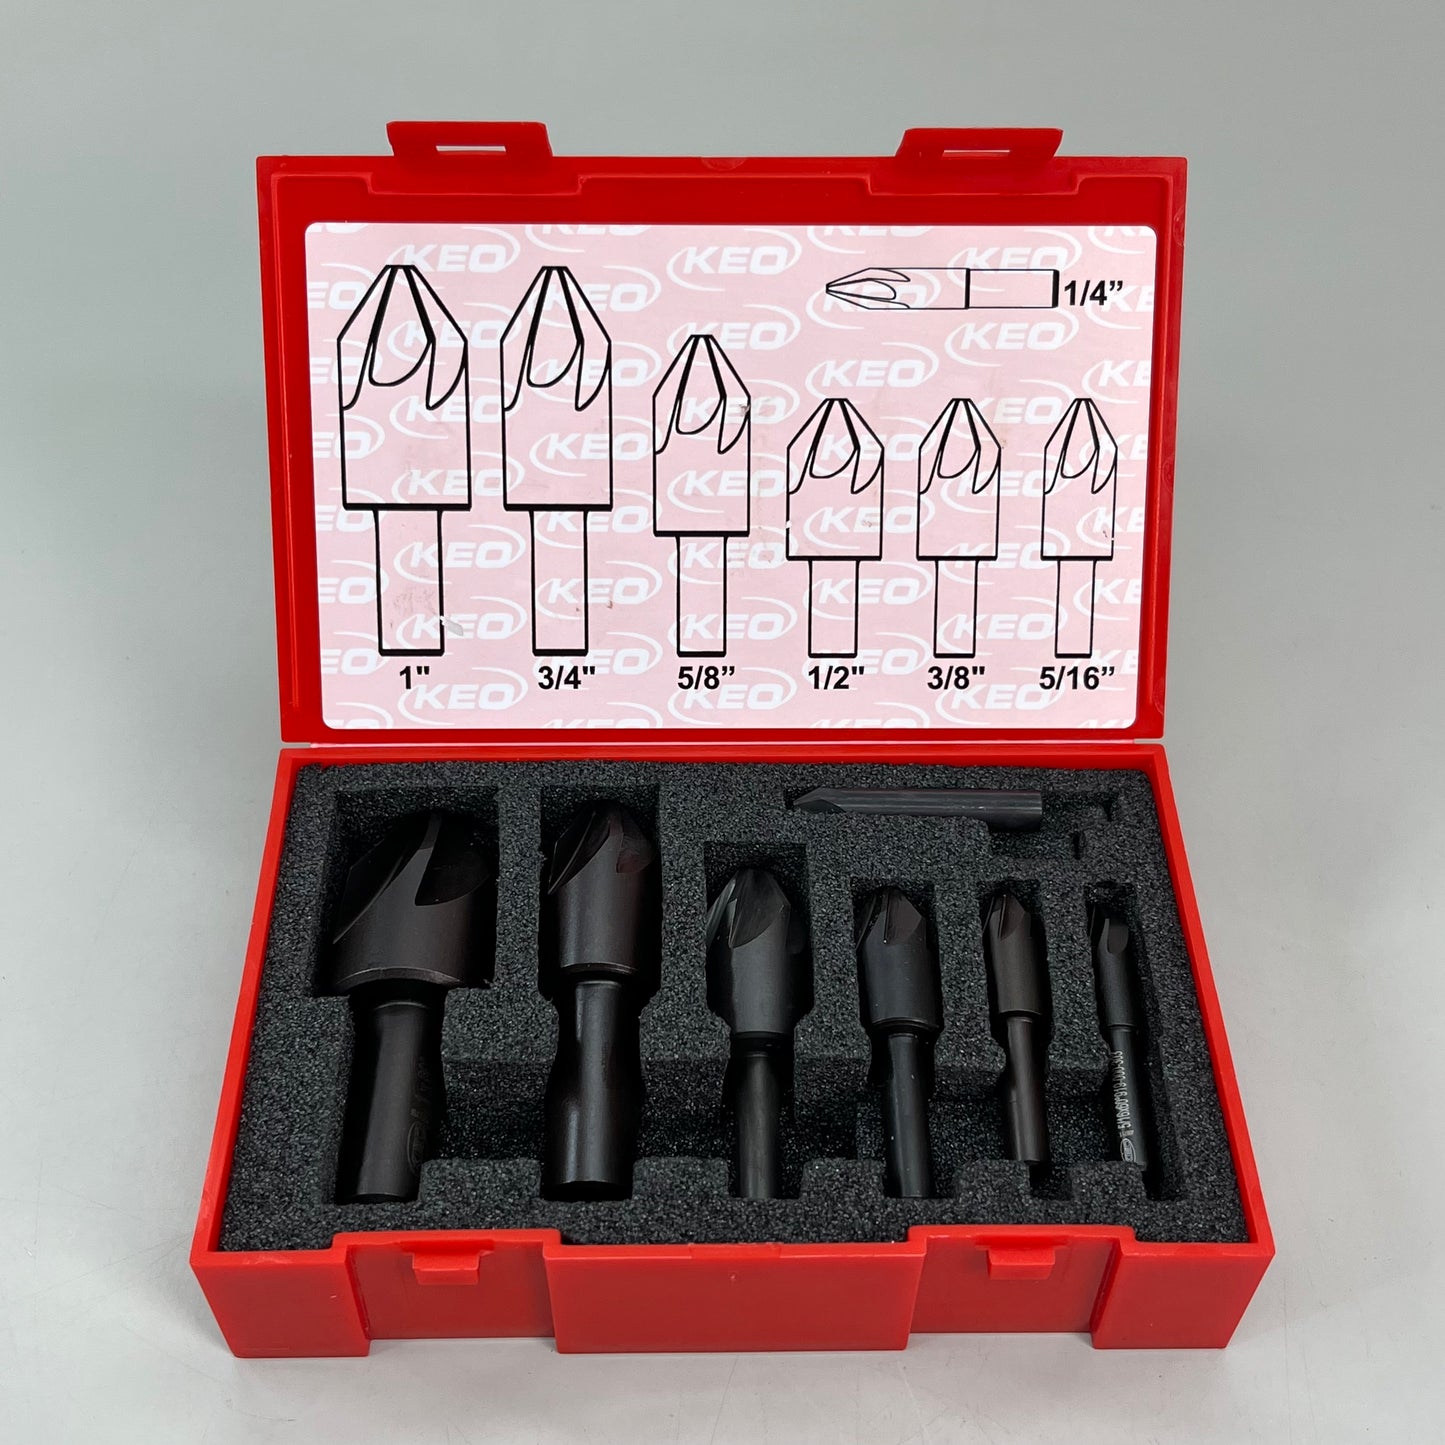 KEO Countersink High Speed Steel Bright (Uncoated) Finish 7 Piece Set Red Box 55018